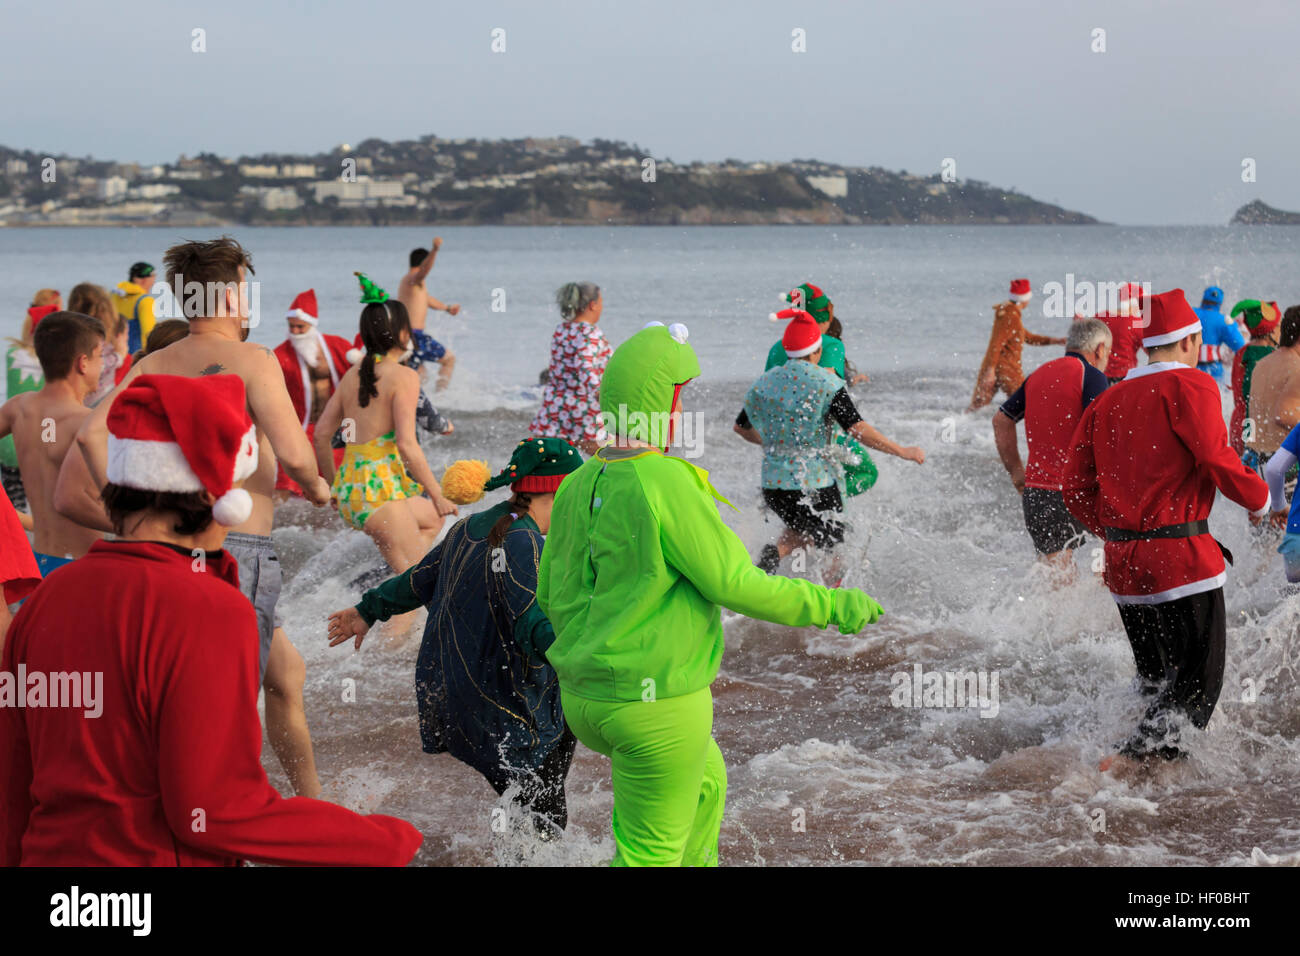 Paignton, Devon, UK, 26 December 2016. Paignton 'Walk in to the Sea', Boxing Day Dip. The annual Boxing Day tradition, common to many coastal locations right across the UK, began in Paignton in 1976. Participants generally dress up in seasonal fancy dress and raise money for the Paignton Lions, who organise the event, and other charities. Credit: Clive Jones/Alamy Live News Stock Photo